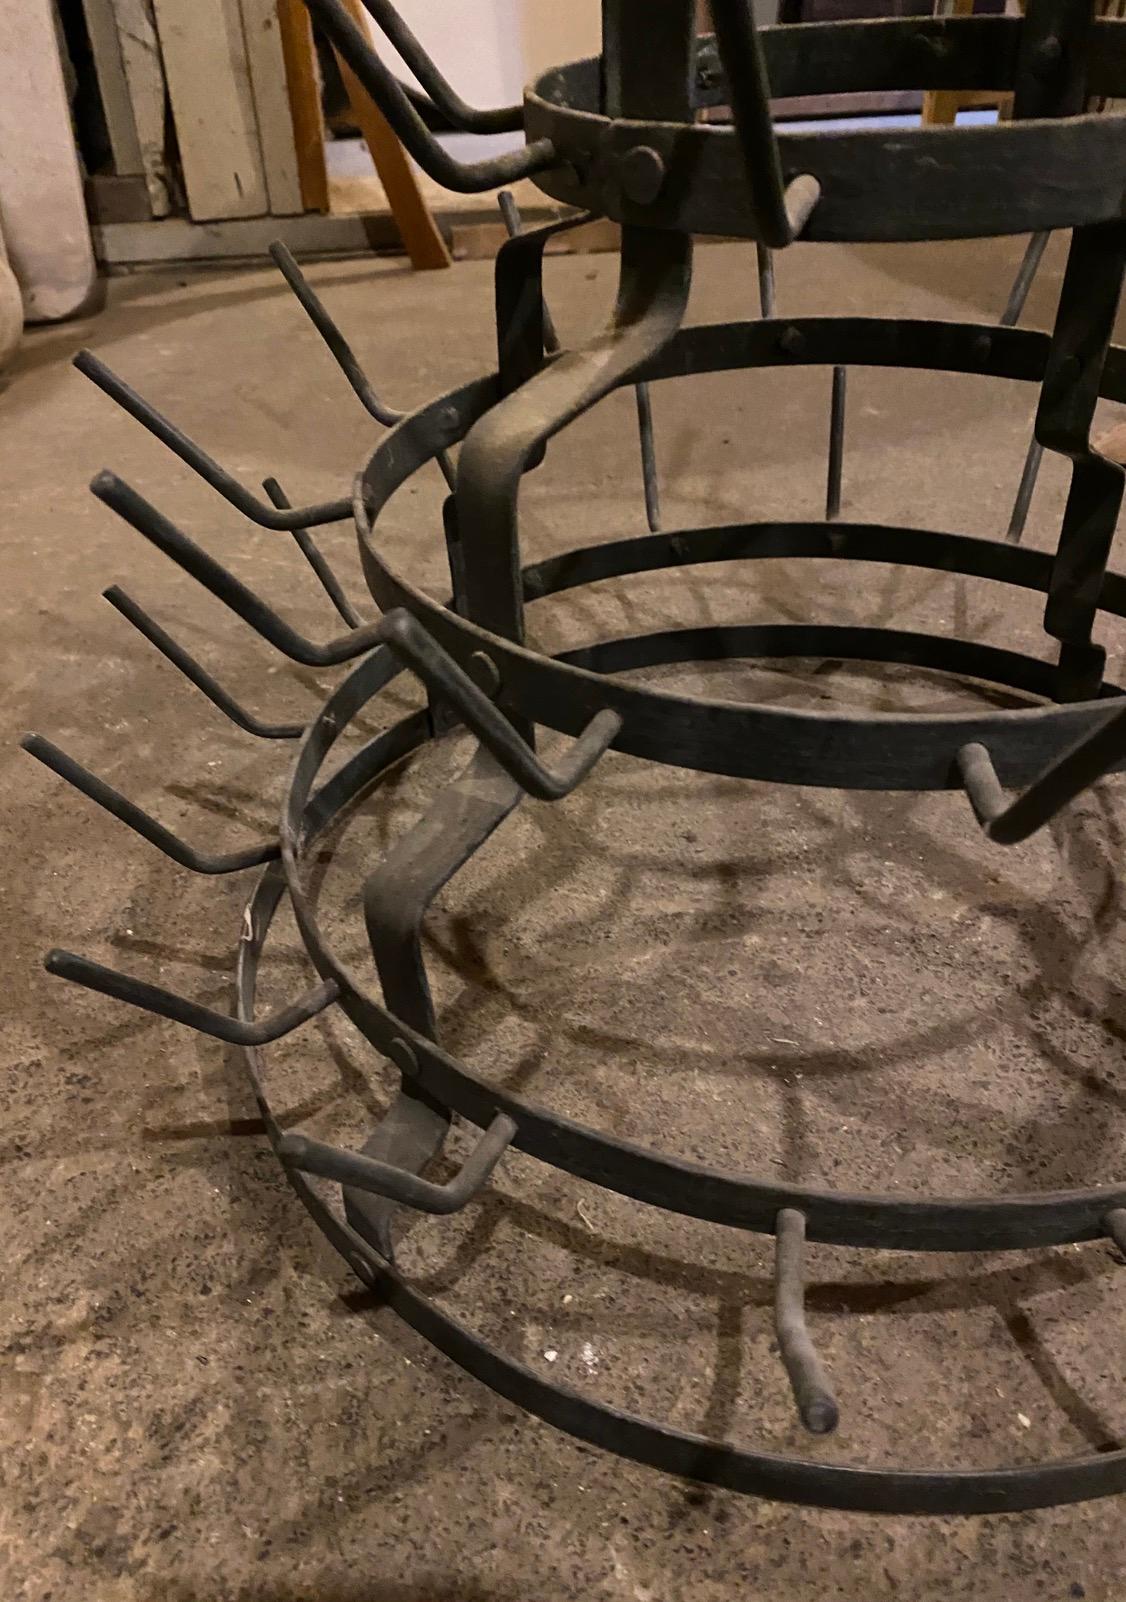 Late 19th century bottle drying rack with six tiers. 60 bottles.  These racks were used in vineyards to dry used wine bottles. Use it to hang coffee cups, jewelry, drying herbs. Will also make a great store fixture for displaying knick knacks.  A